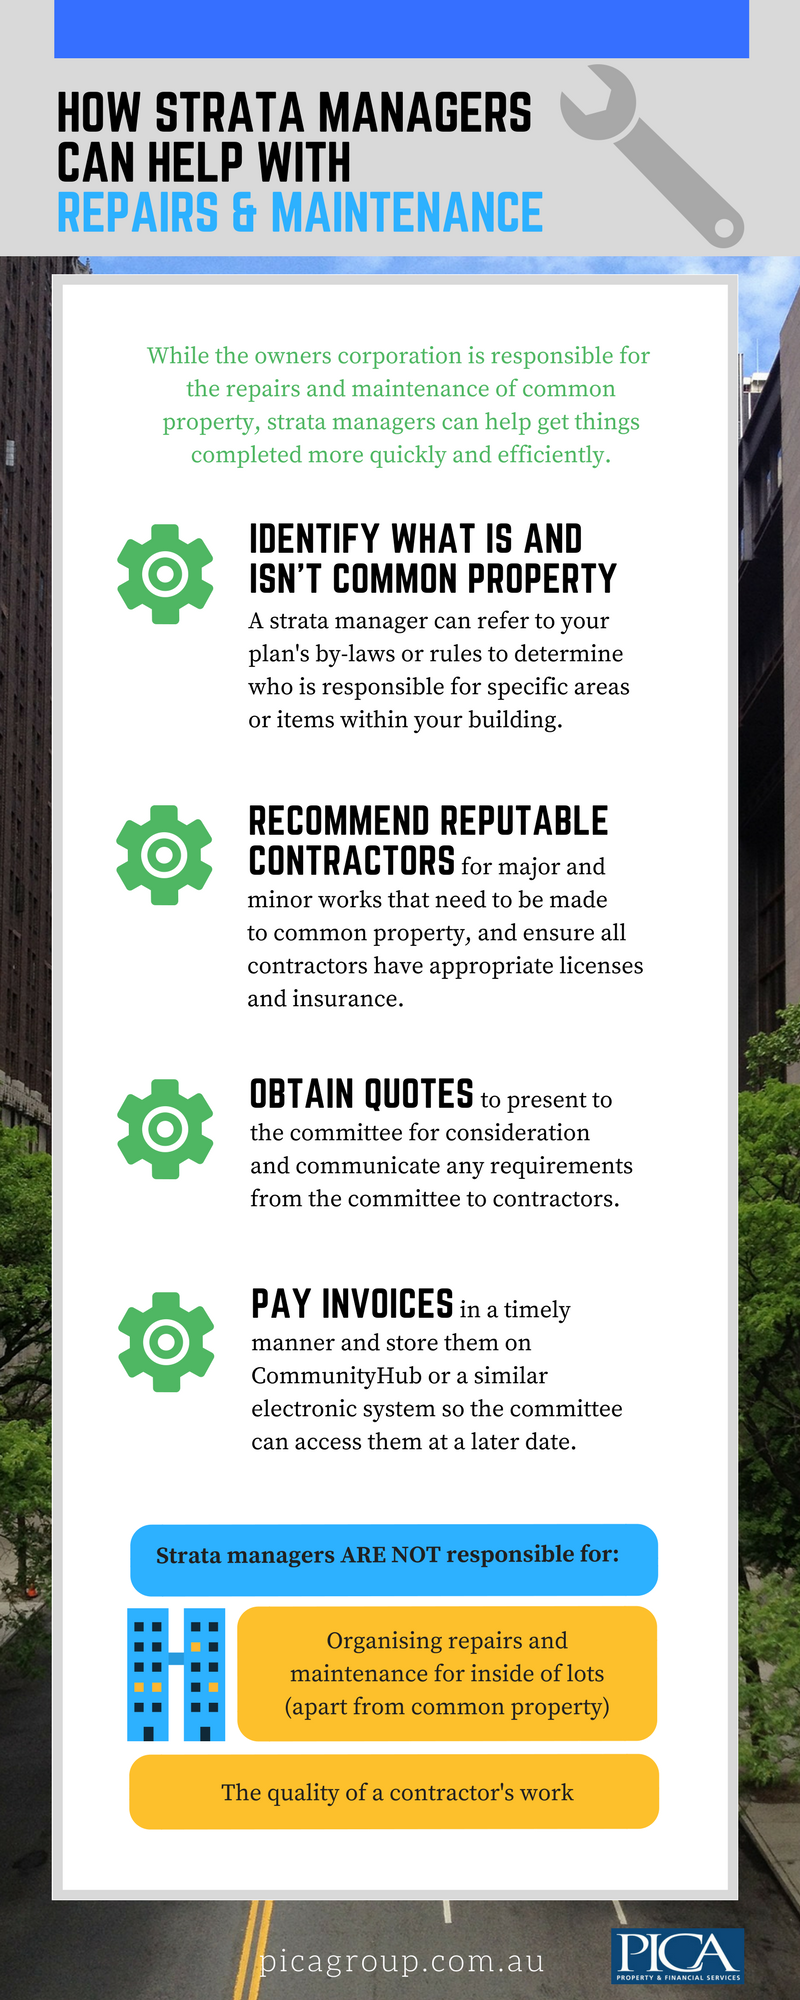 How a strata manager can help with repairs and maintenance